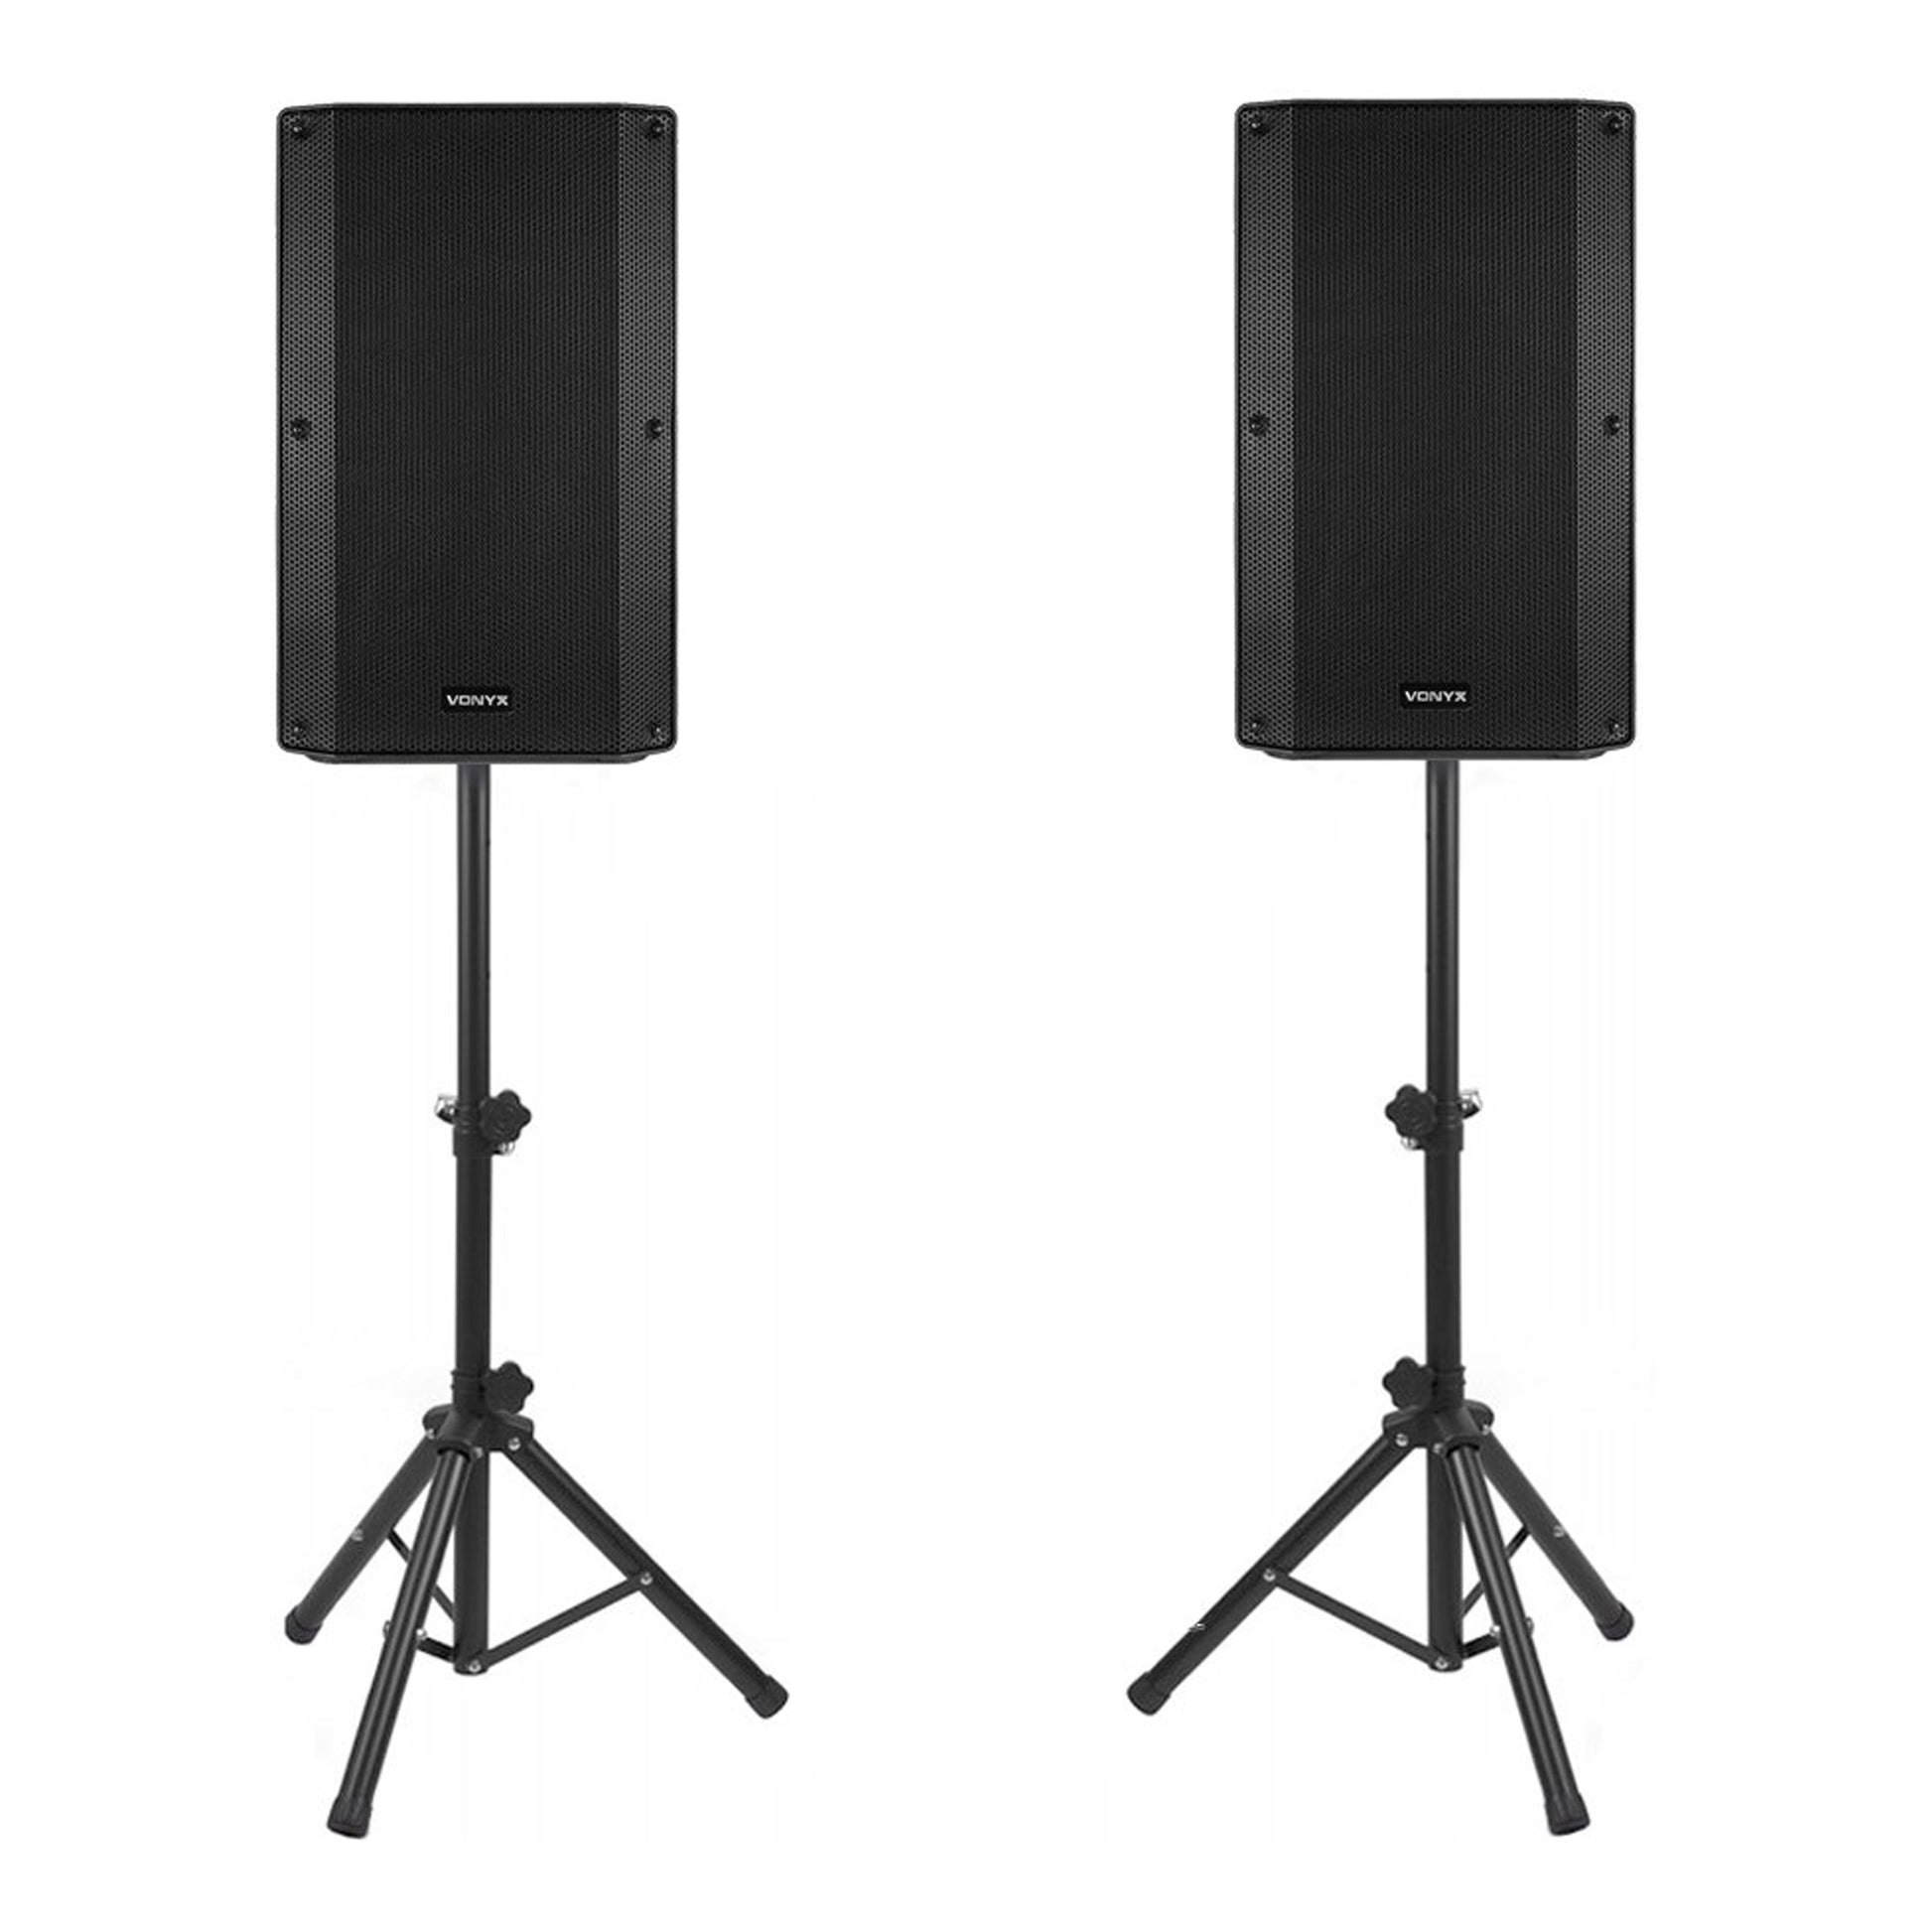 Powered PA Speaker Set Hire in Cairns from Rent Some Fun Party Hire